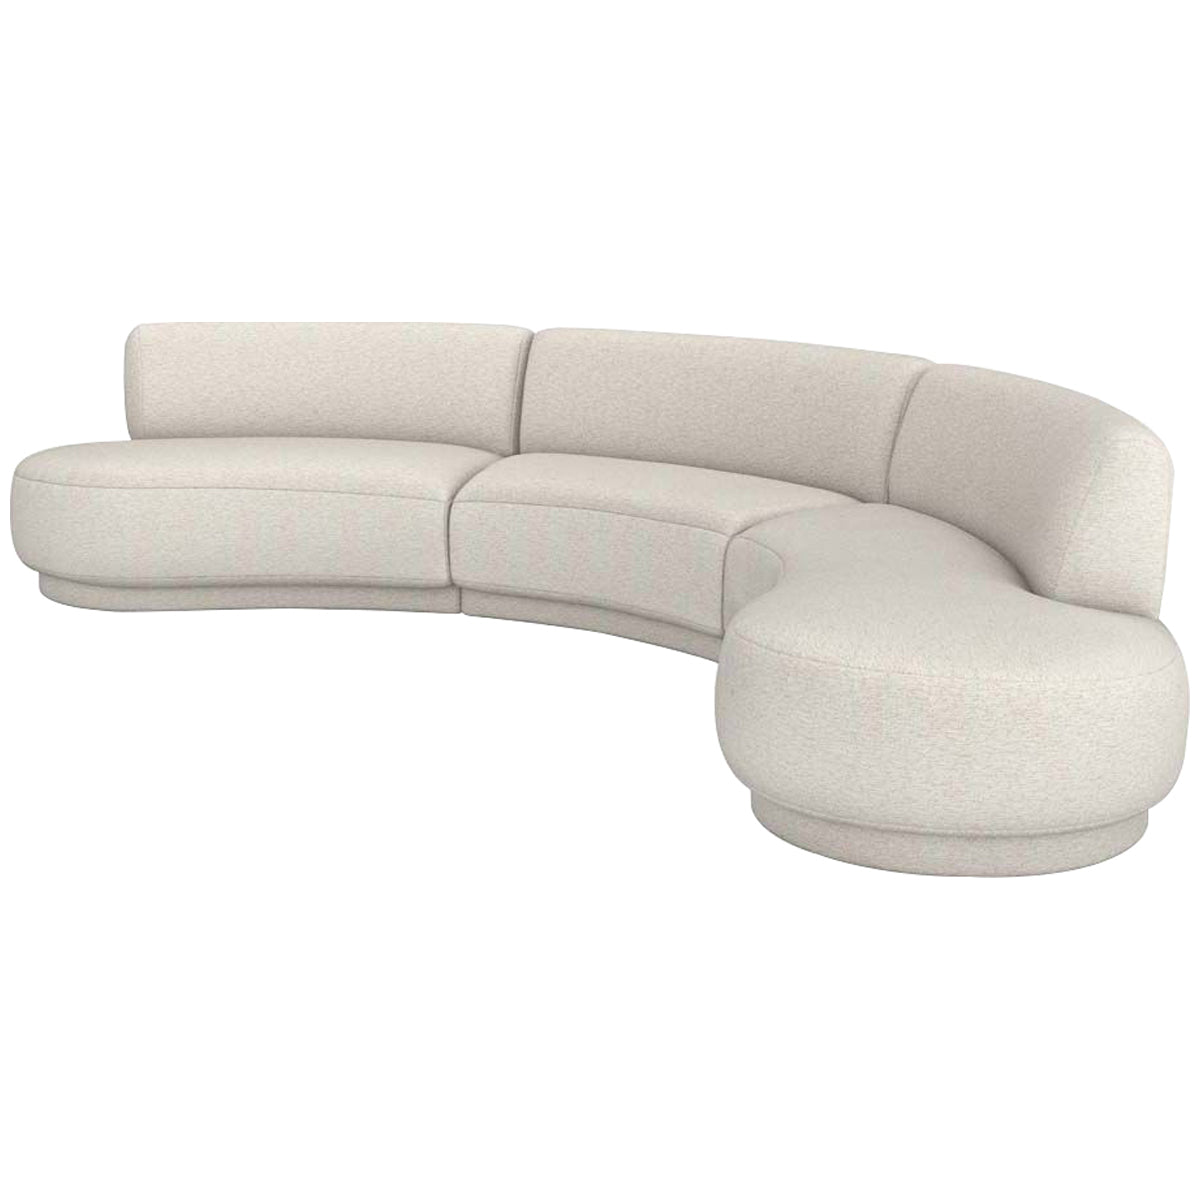 Interlude Home Nuage Sectional - Drift